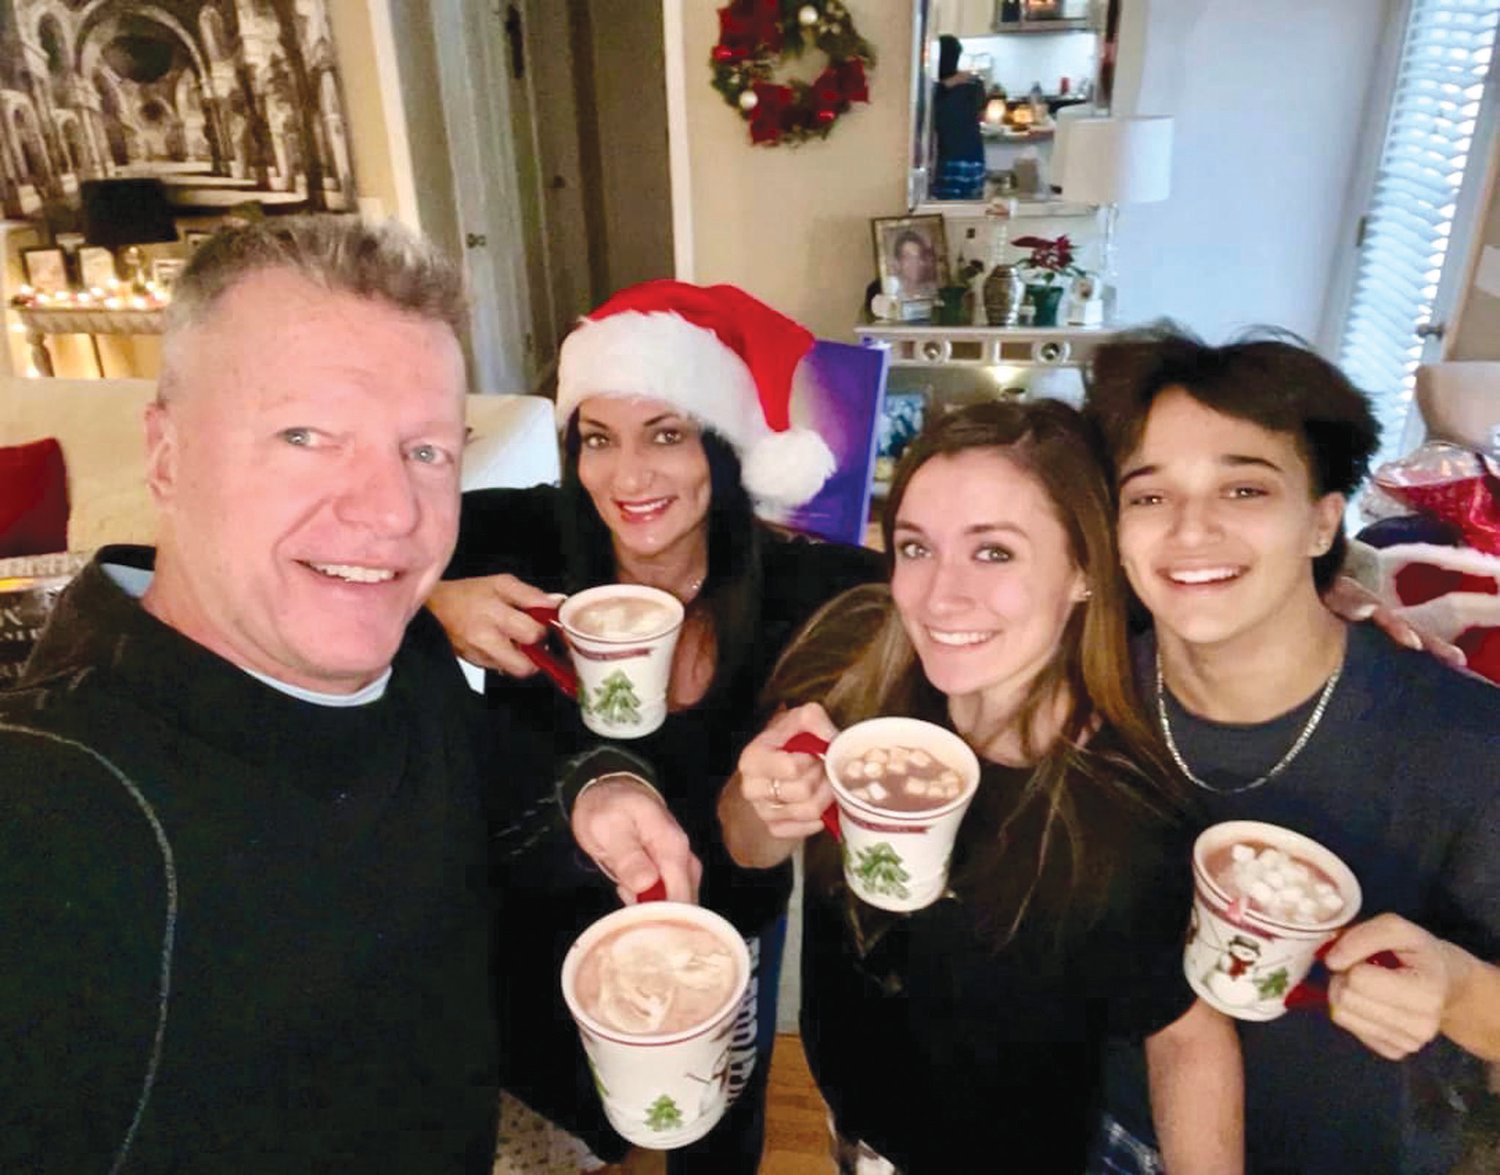 Olivia Passaretti posed for a photo with her sister Victoria, mother and stepfather on Christmas 2021.